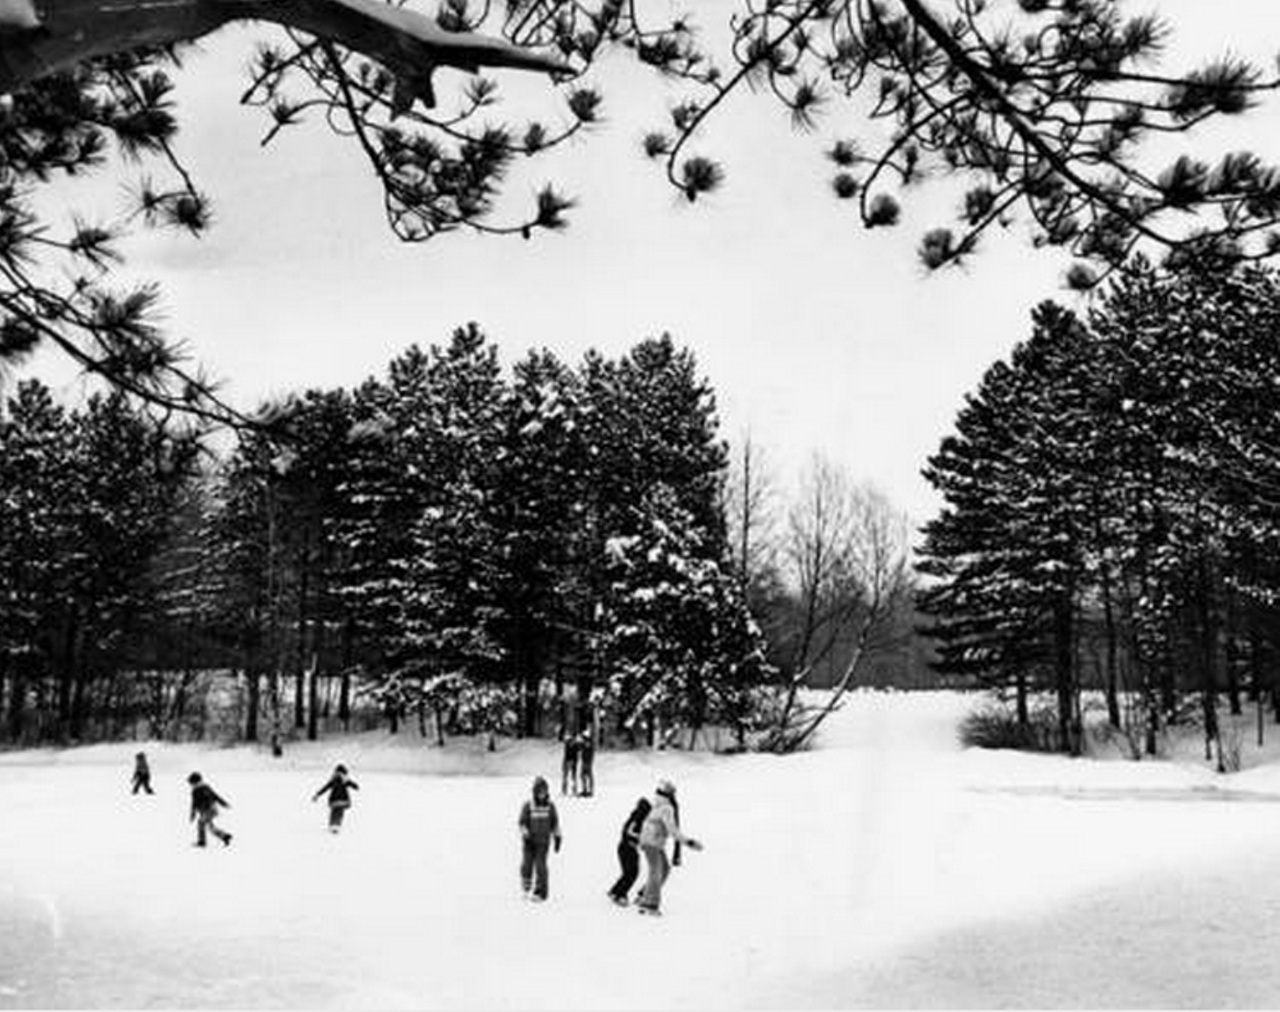 Ice skating on Strawberry Lane Pond in the North Chagrin Reservation, 1978.